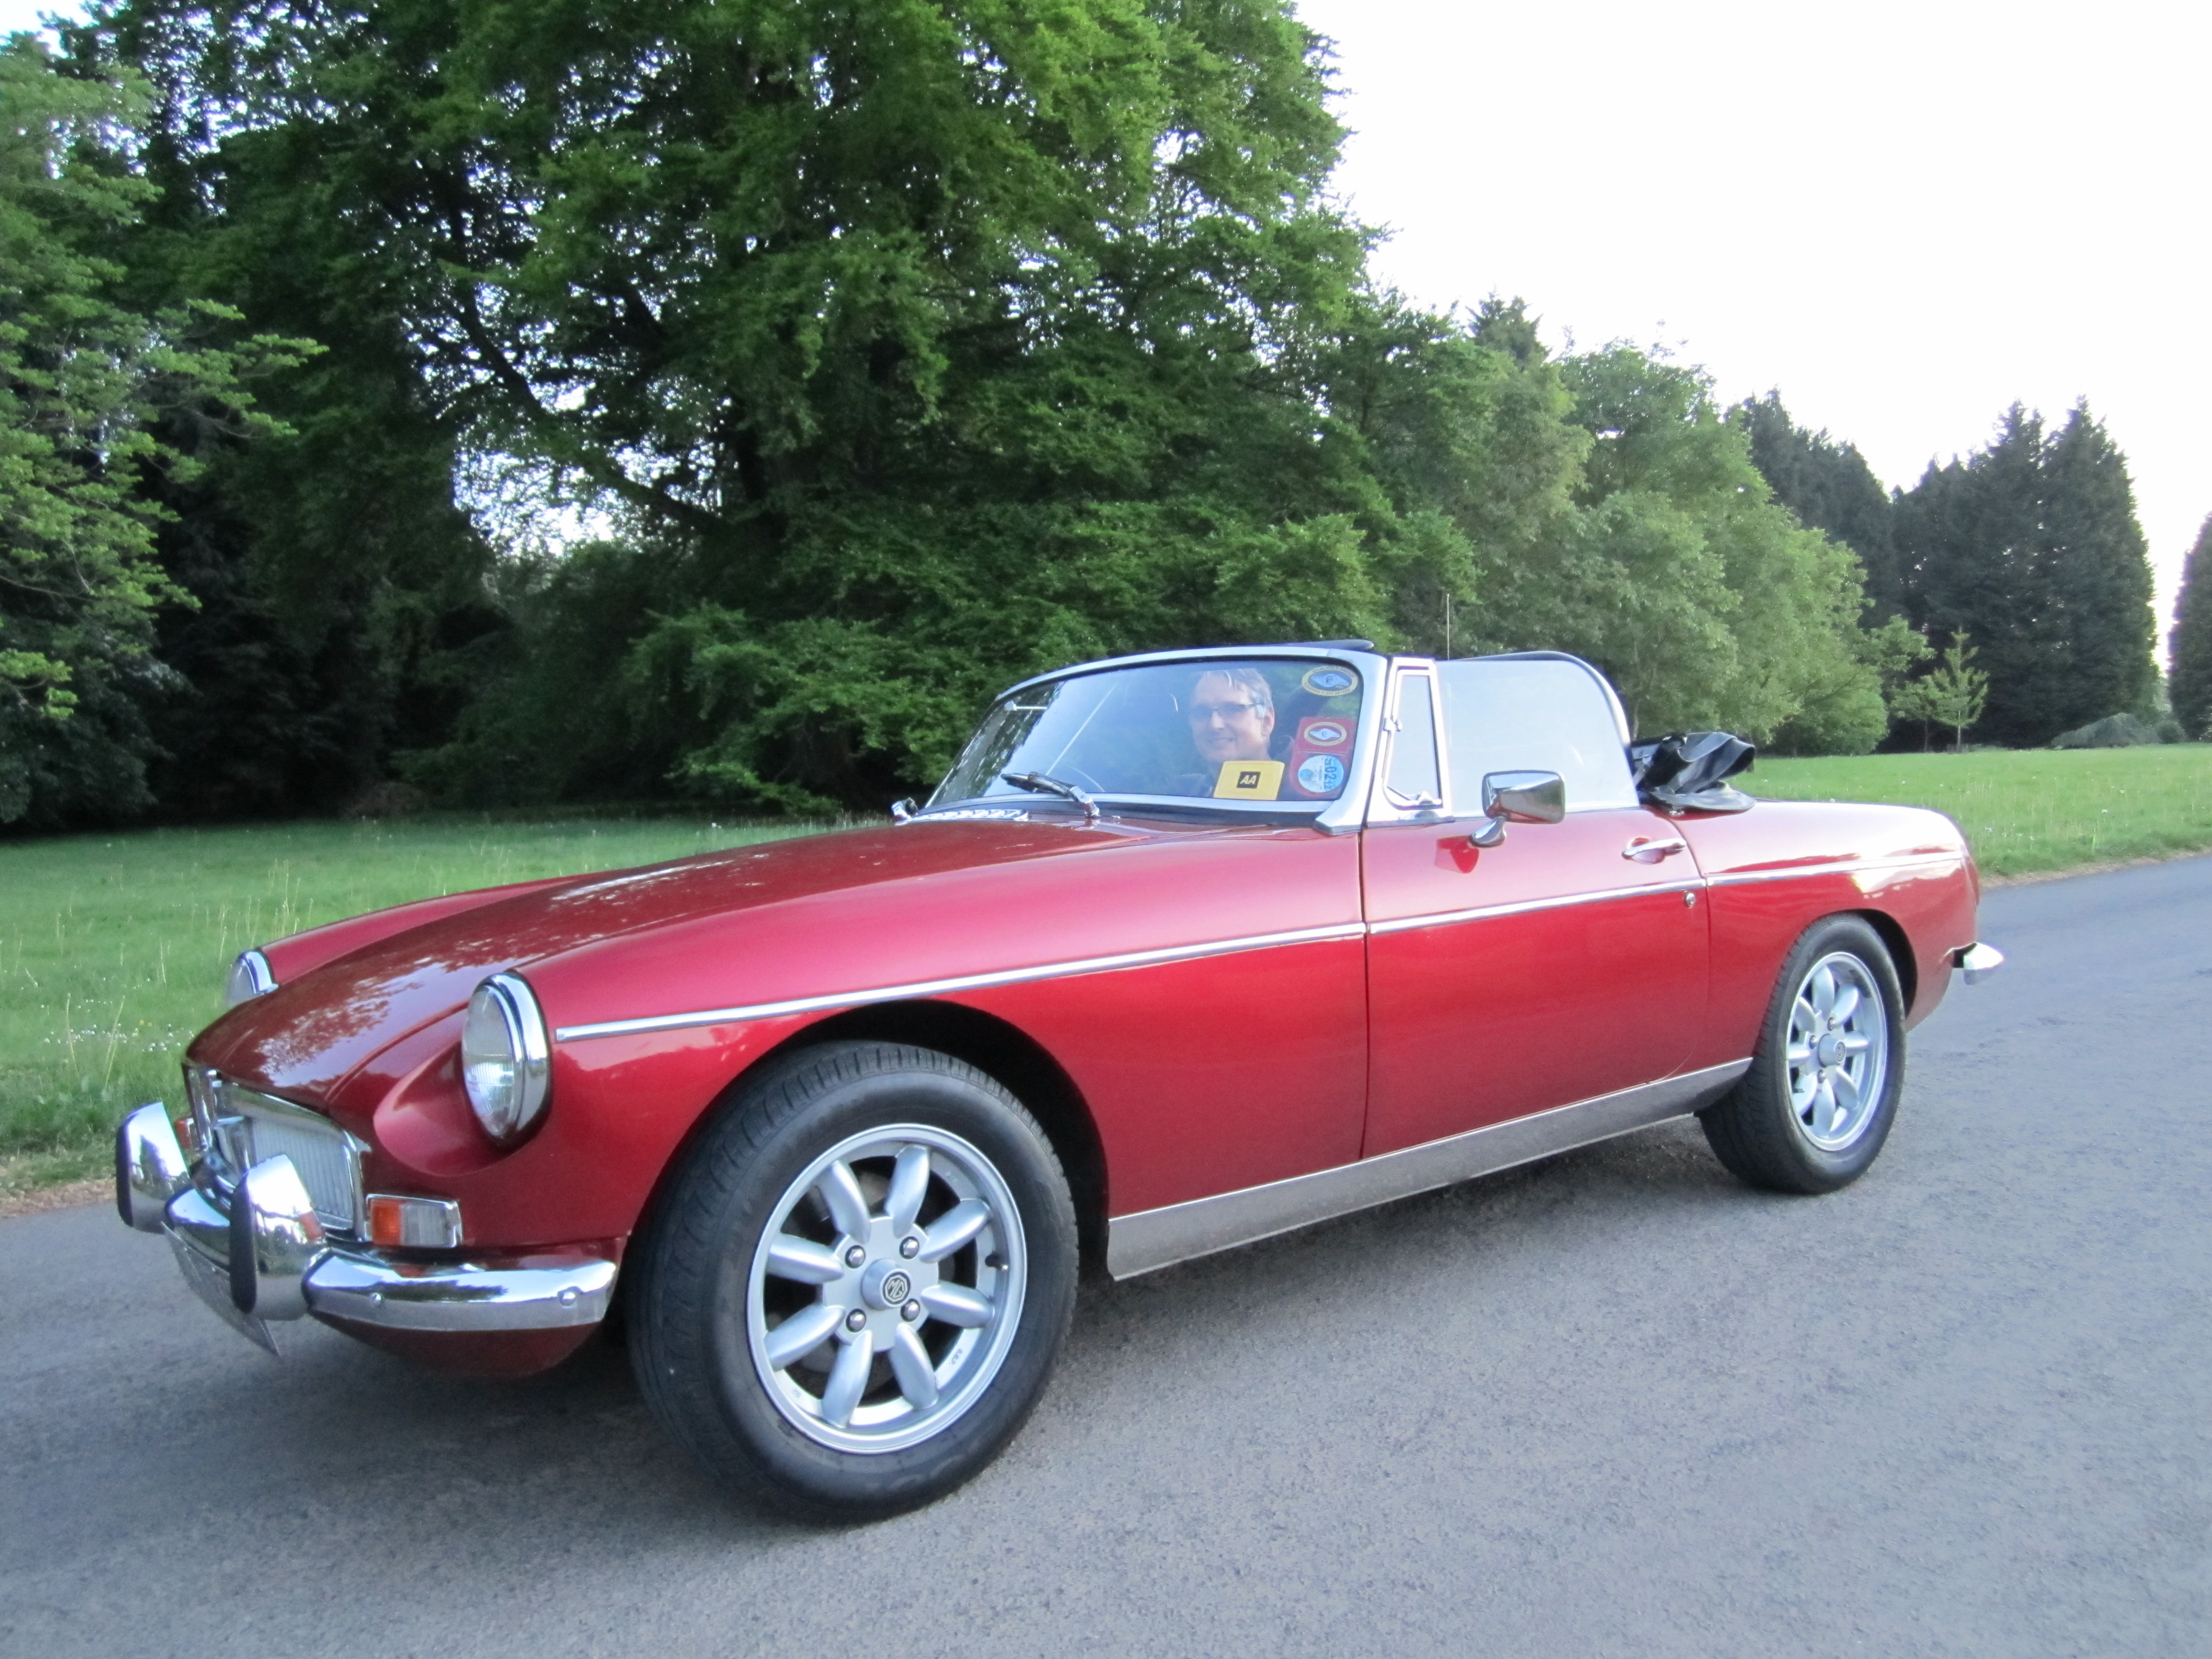 MGB has its own distinctive styling